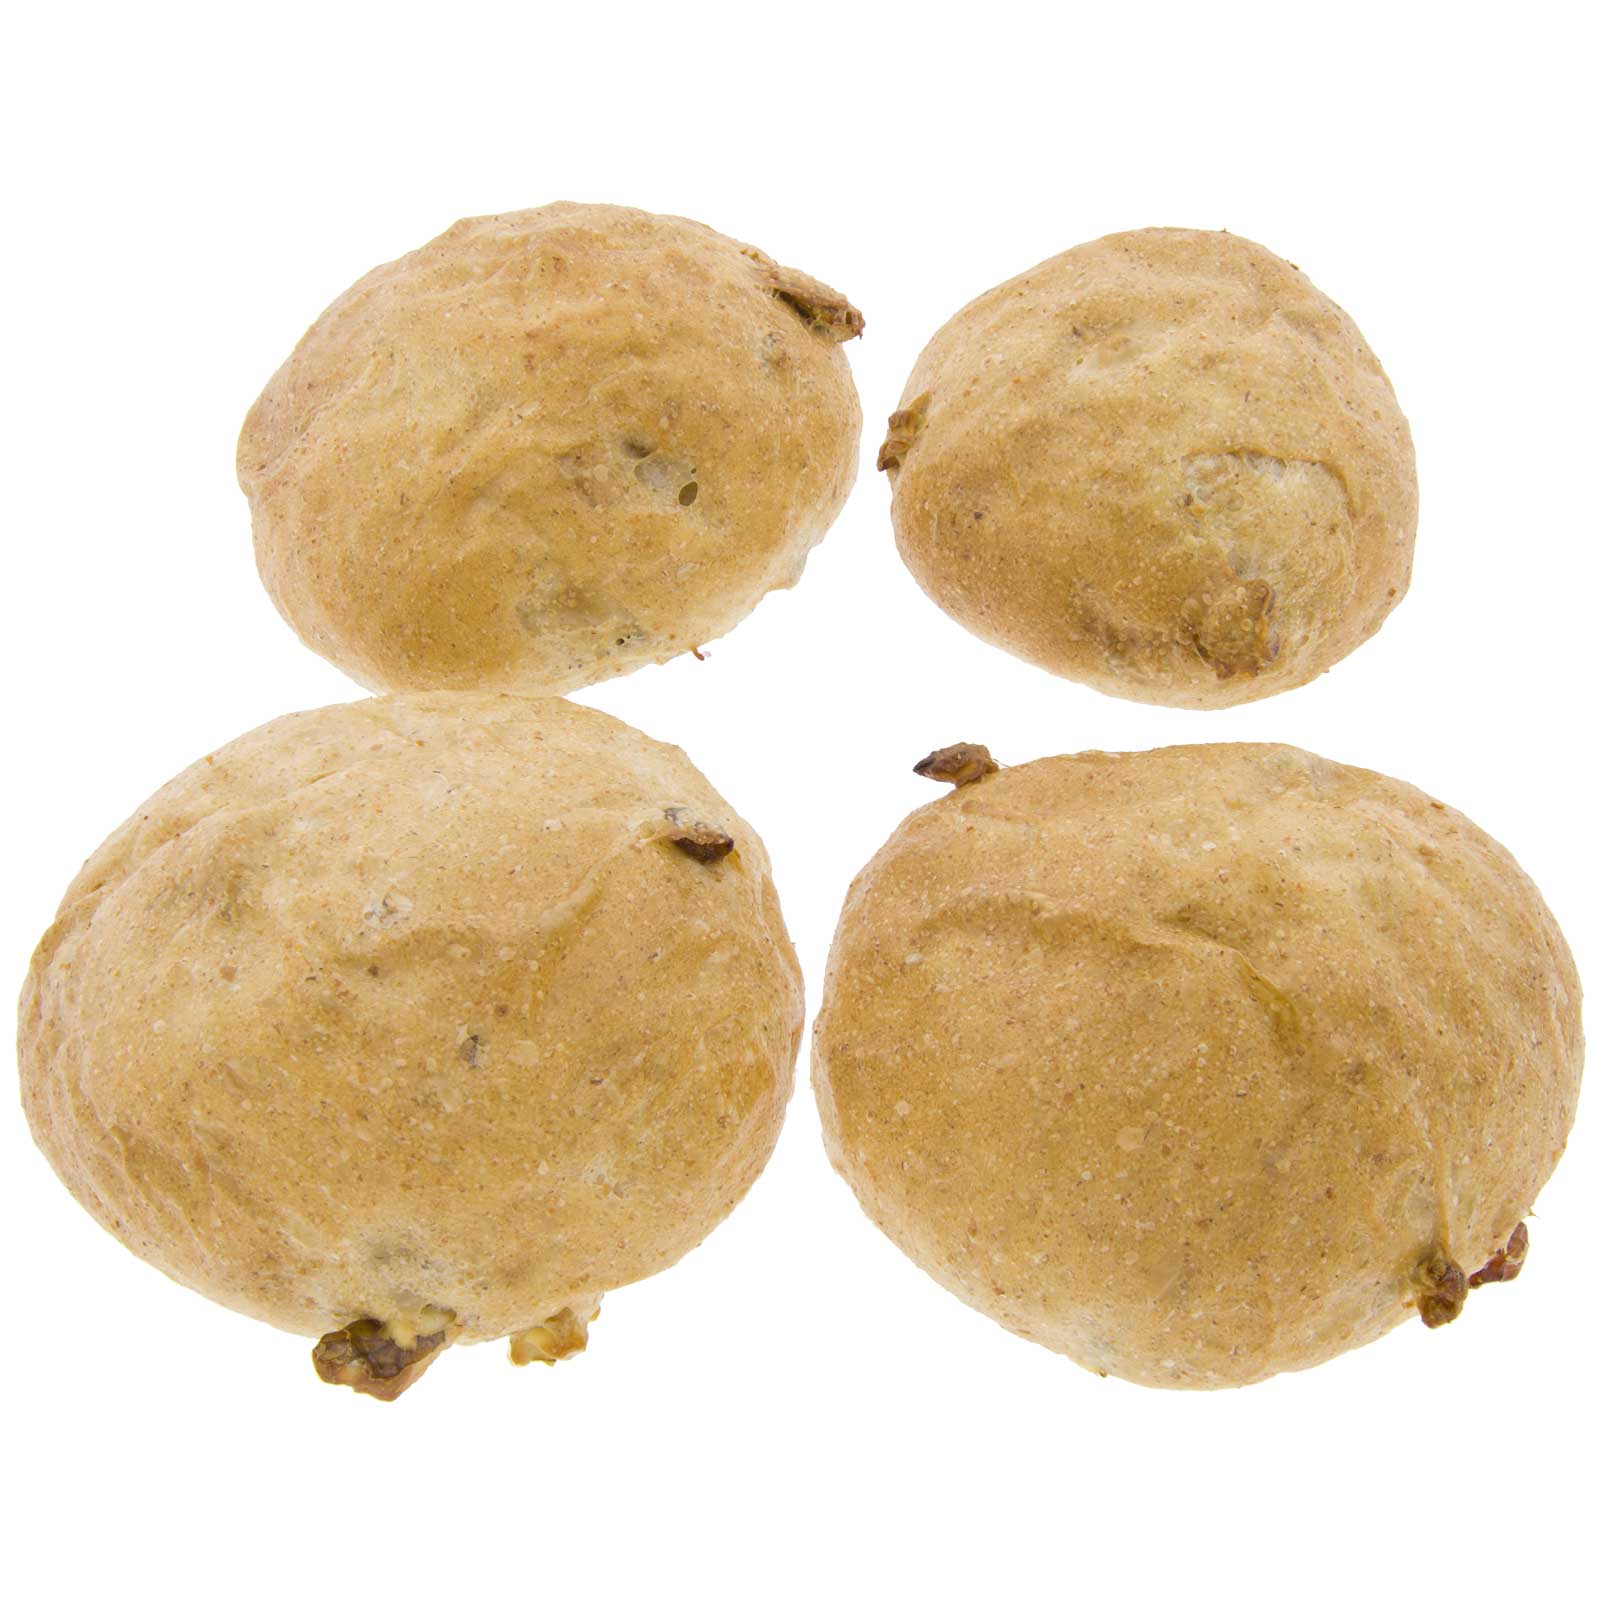 Buns wheat brioche with raisins and nuts 250g (4x65g) ecological